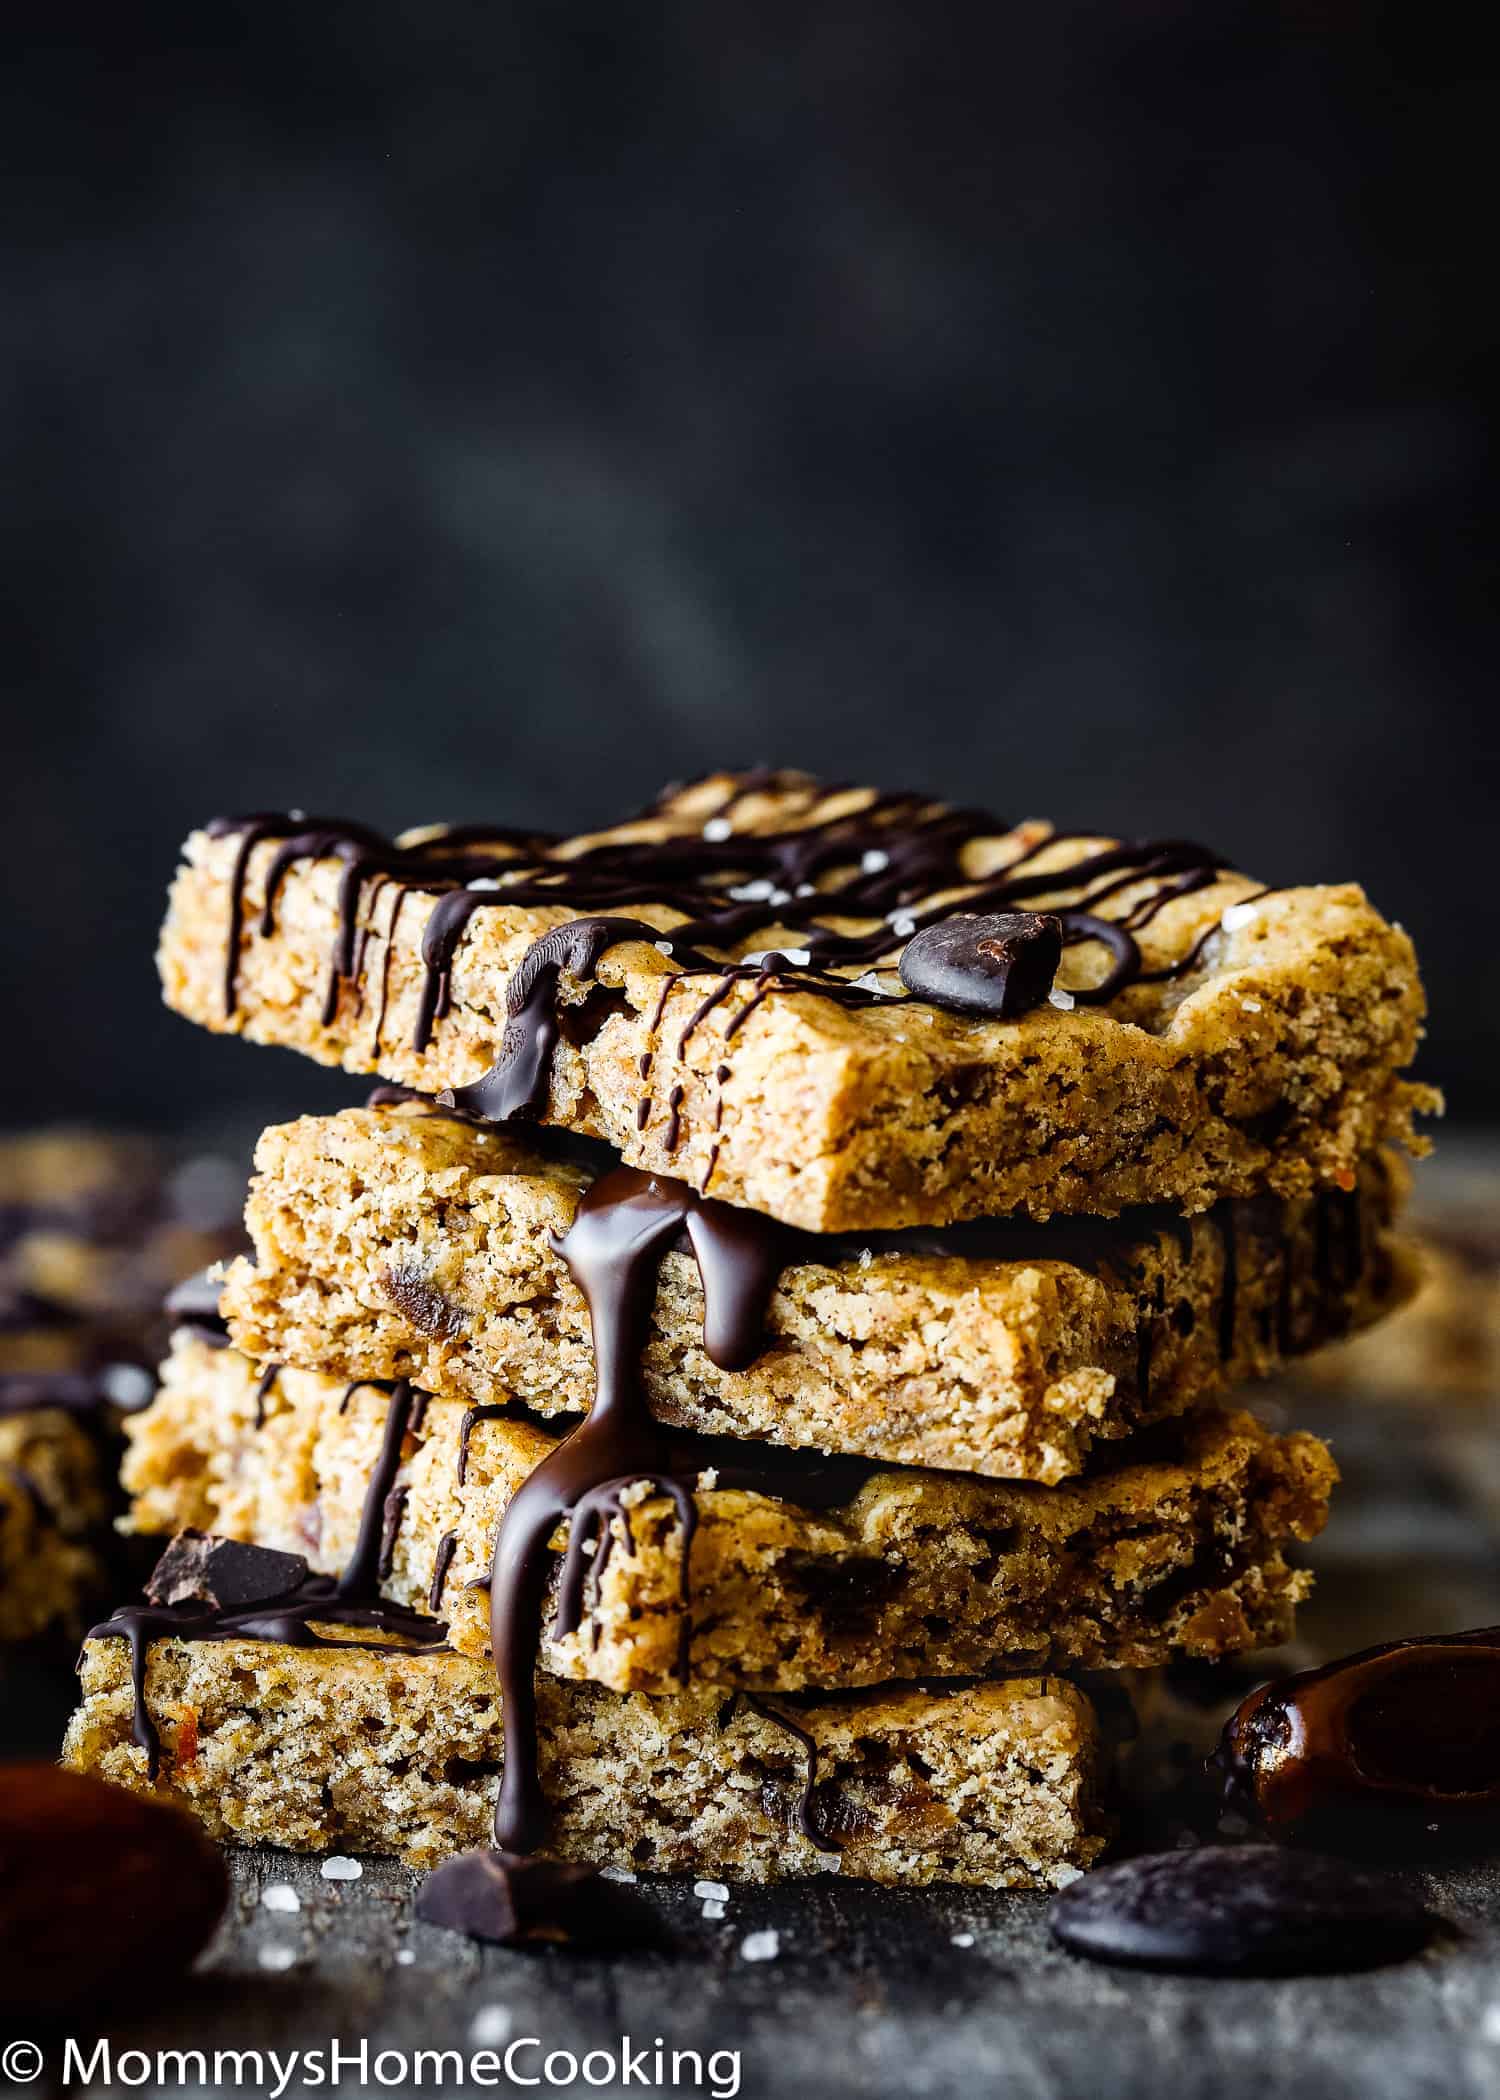 These Healthy Eggless Energy Bars are the perfect pick-me-up! They’re easy to make and fun to customize to your family’s’ tastes using ingredients you have on hand. Picky-eater approved. Several add-ons ideas included. https://mommyshoemcooking.com